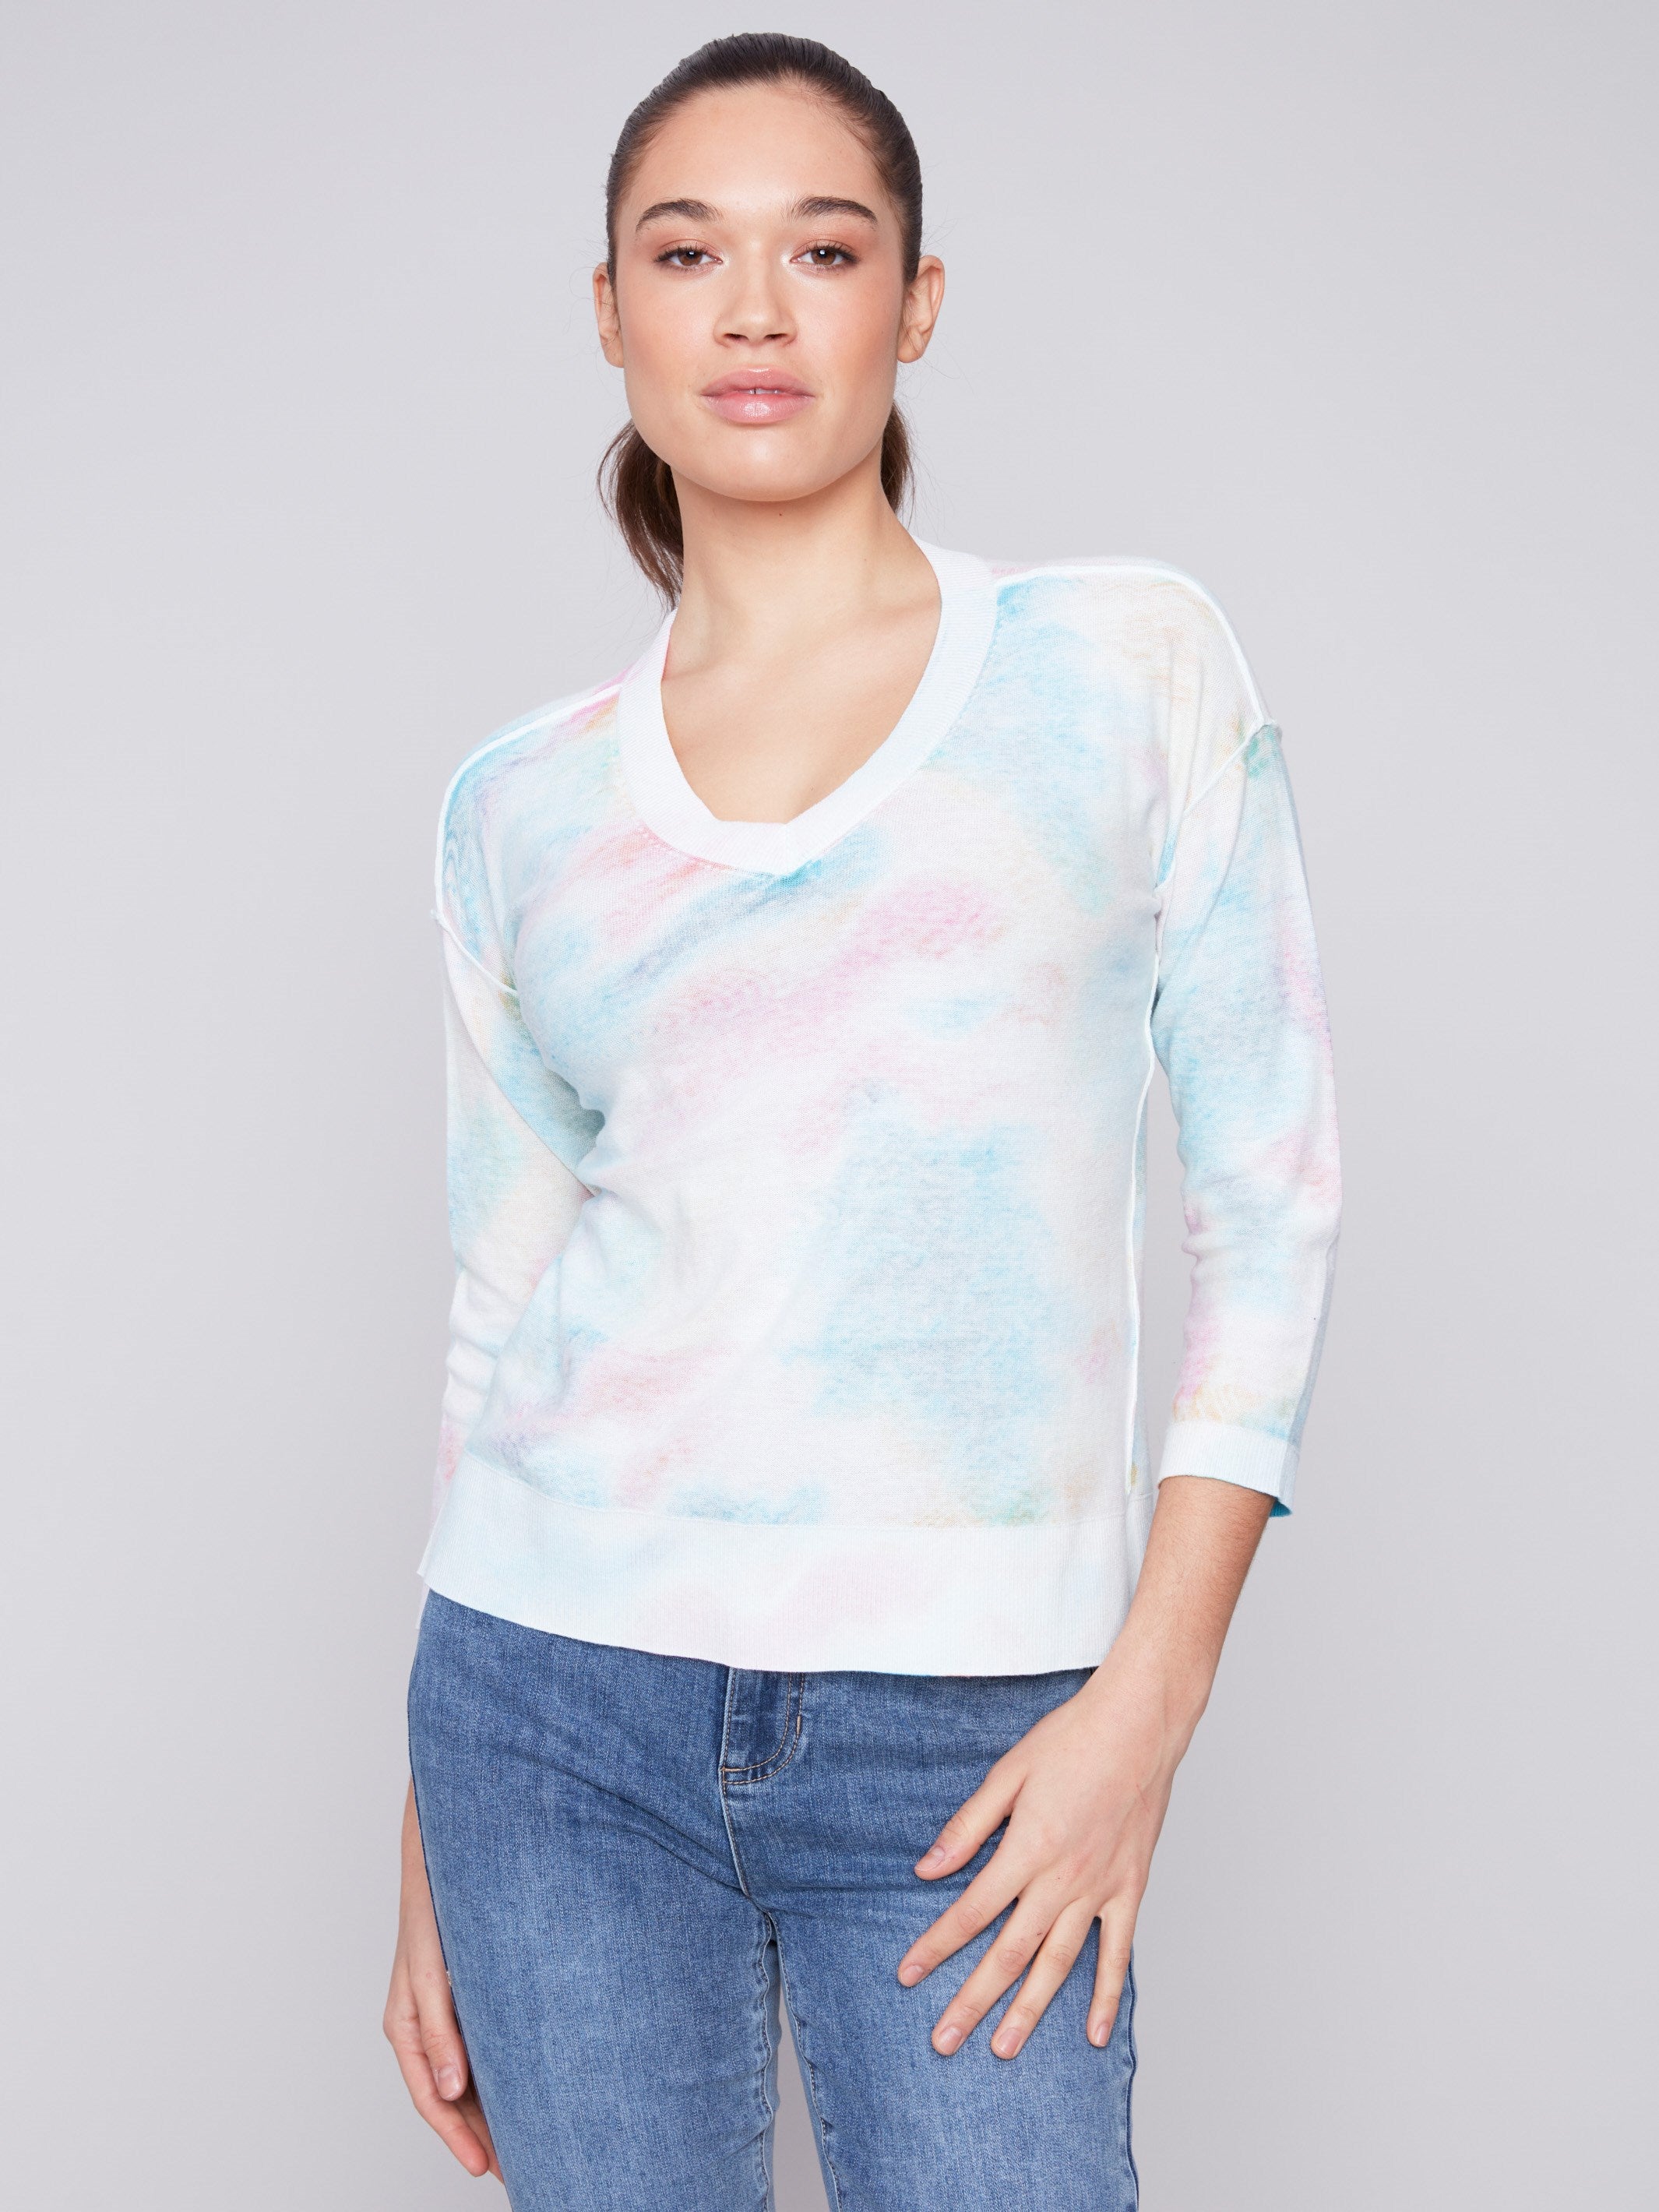 Reversible Cotton Sweater - Multicolor - Charlie B Collection Canada - Image 1